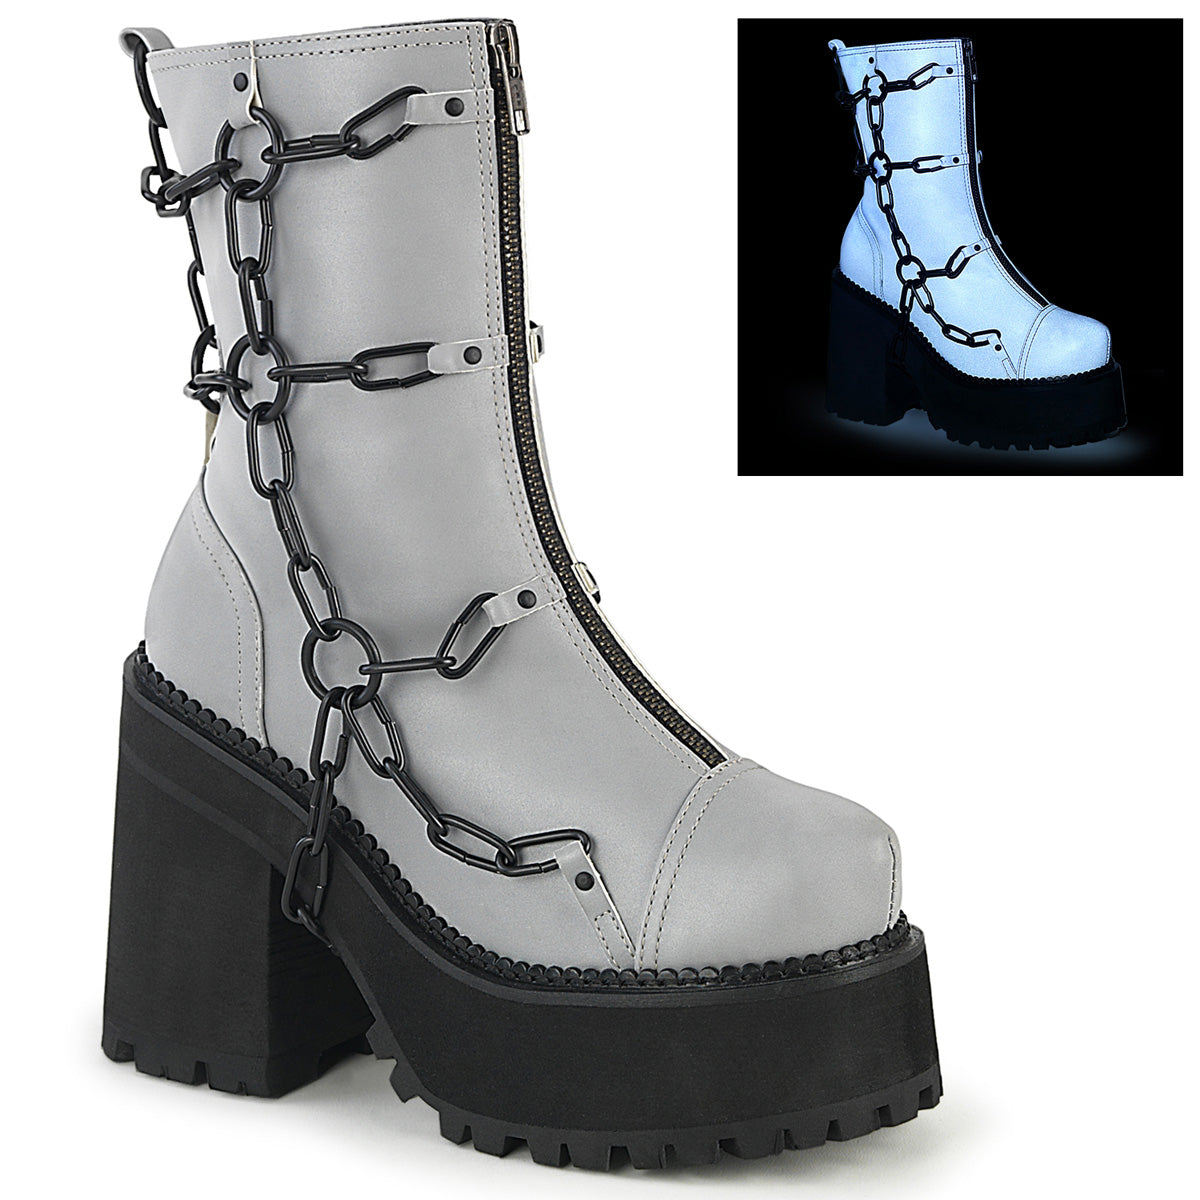 DemoniaCult Womens Ankle Boots ASSAULT-66 Grey Reflective Vegan Leather